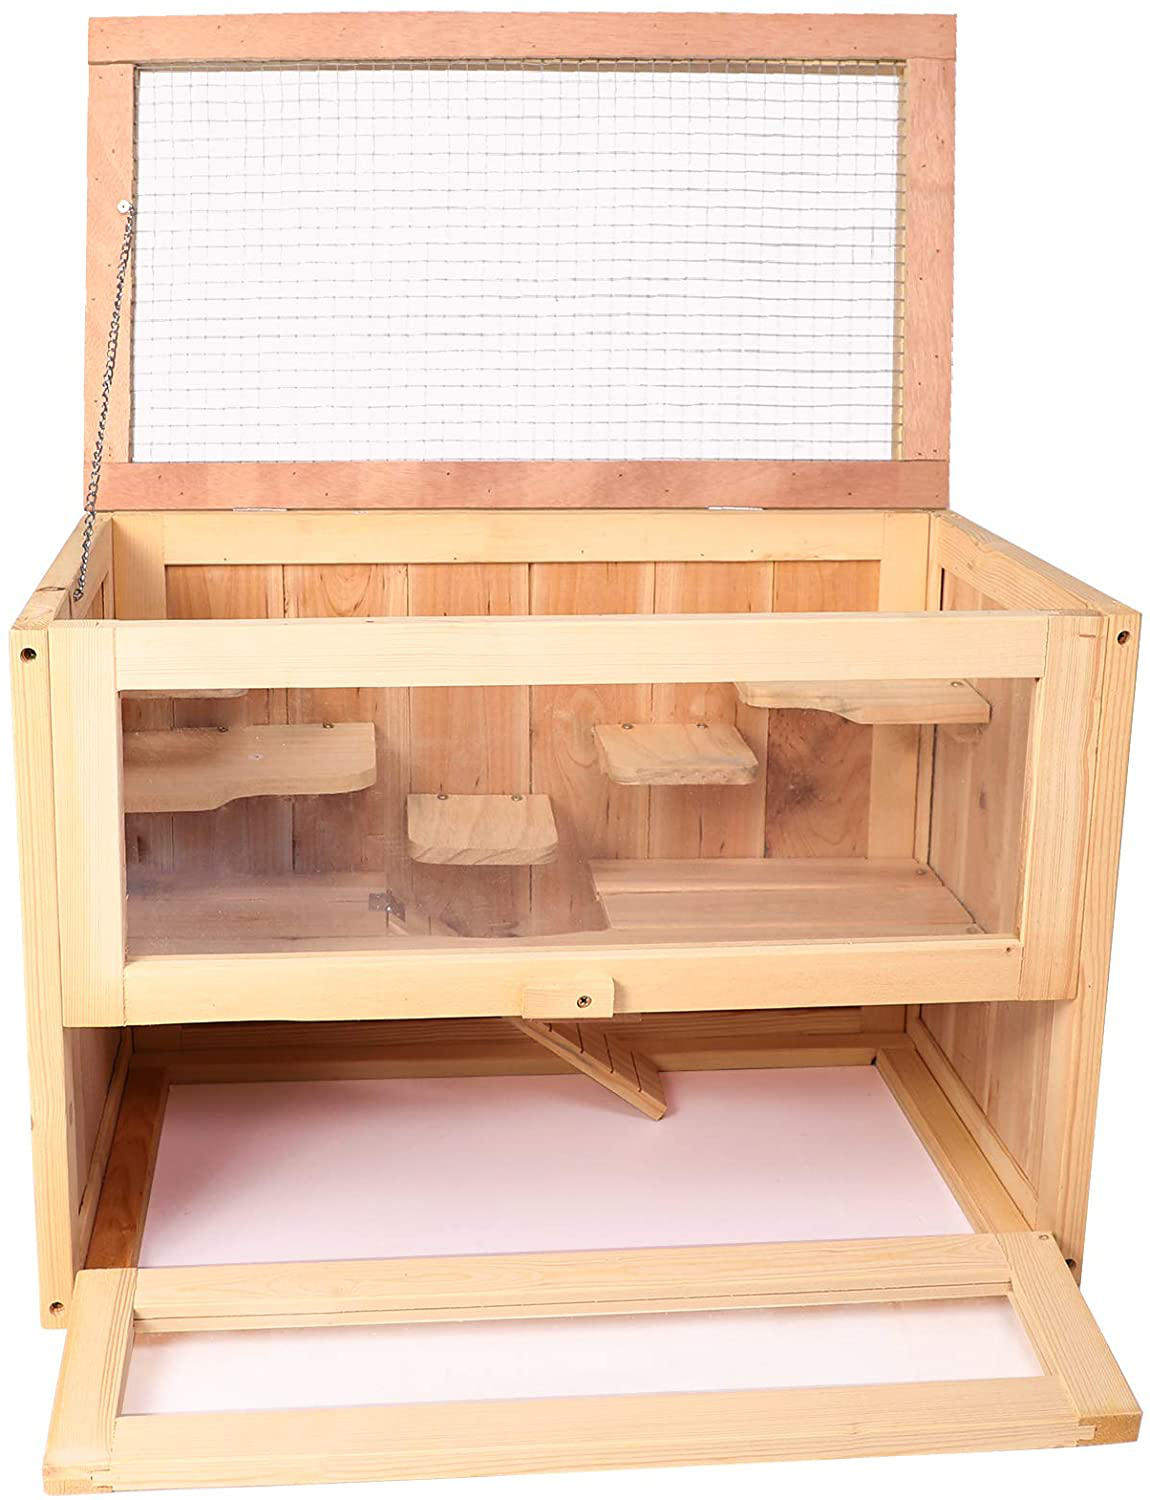 LONABR Hamster Cage Deluxe Two Layers Wooden Hut Small Animal Play House with Shelf and Ladder